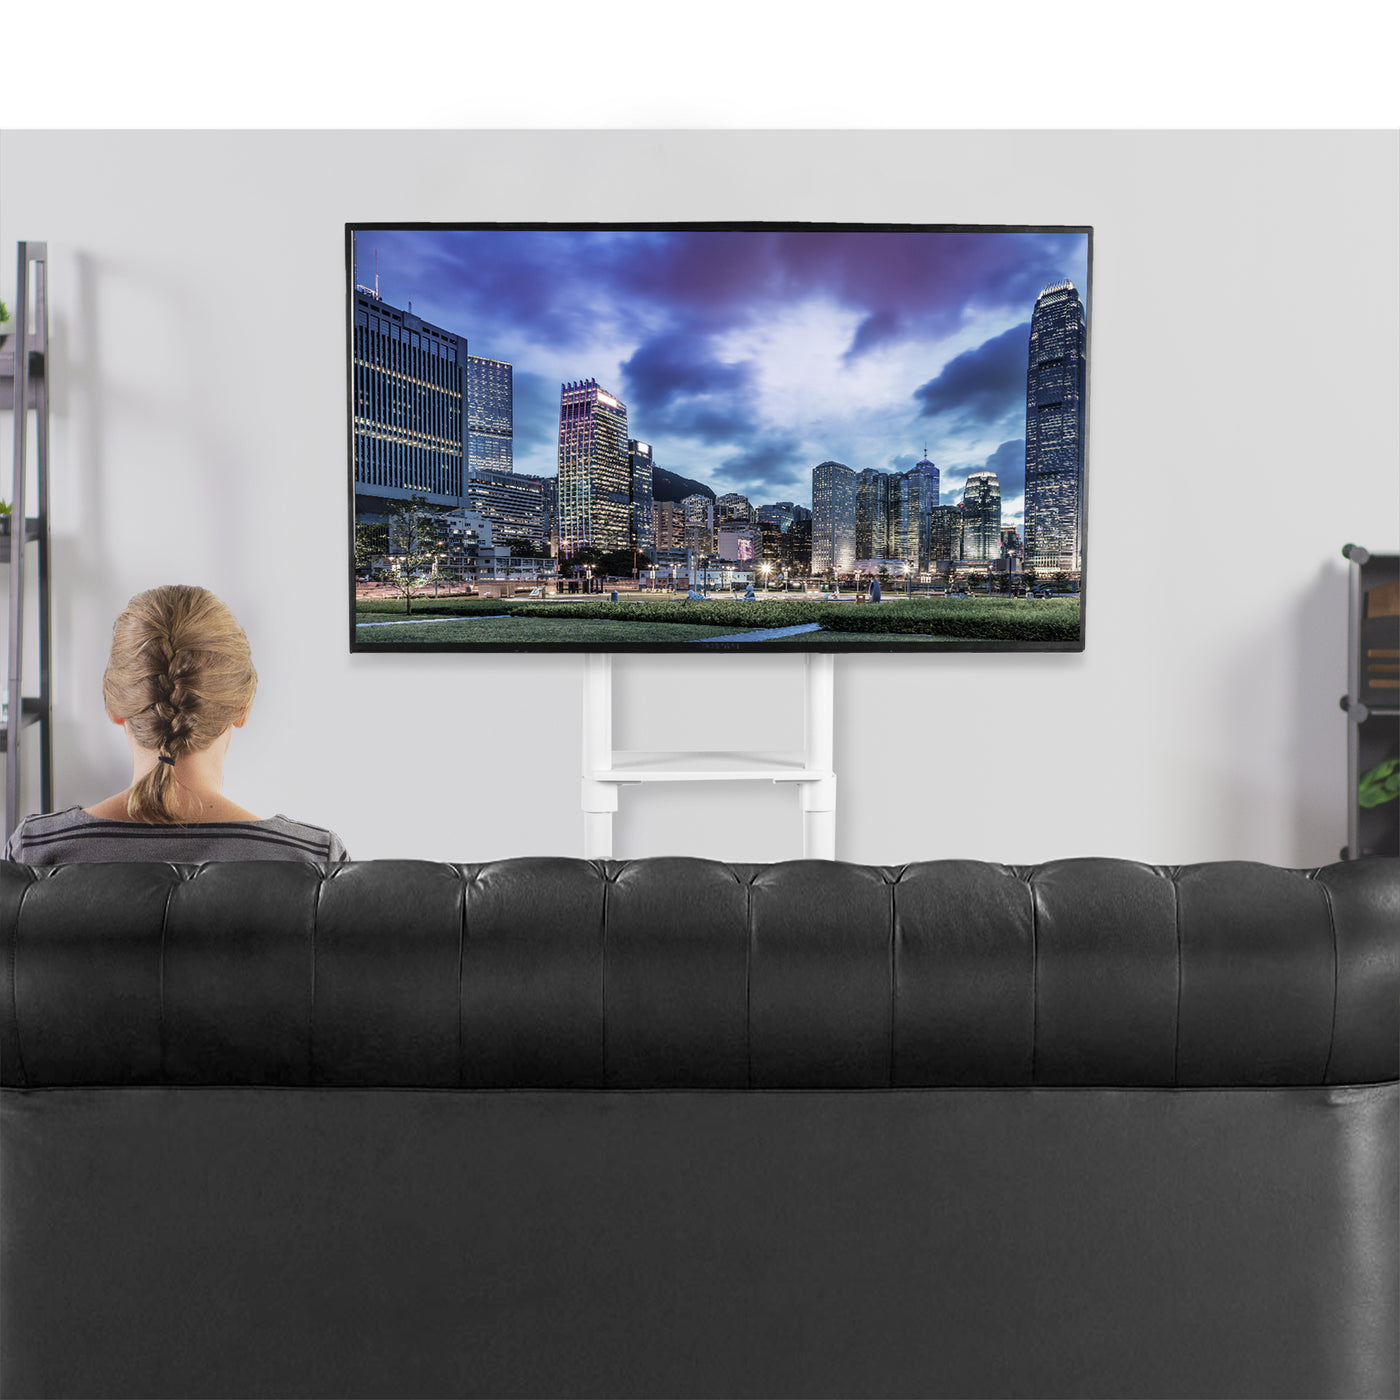 Large TV screen mounted to a mobile TV stand with locking caster wheels.